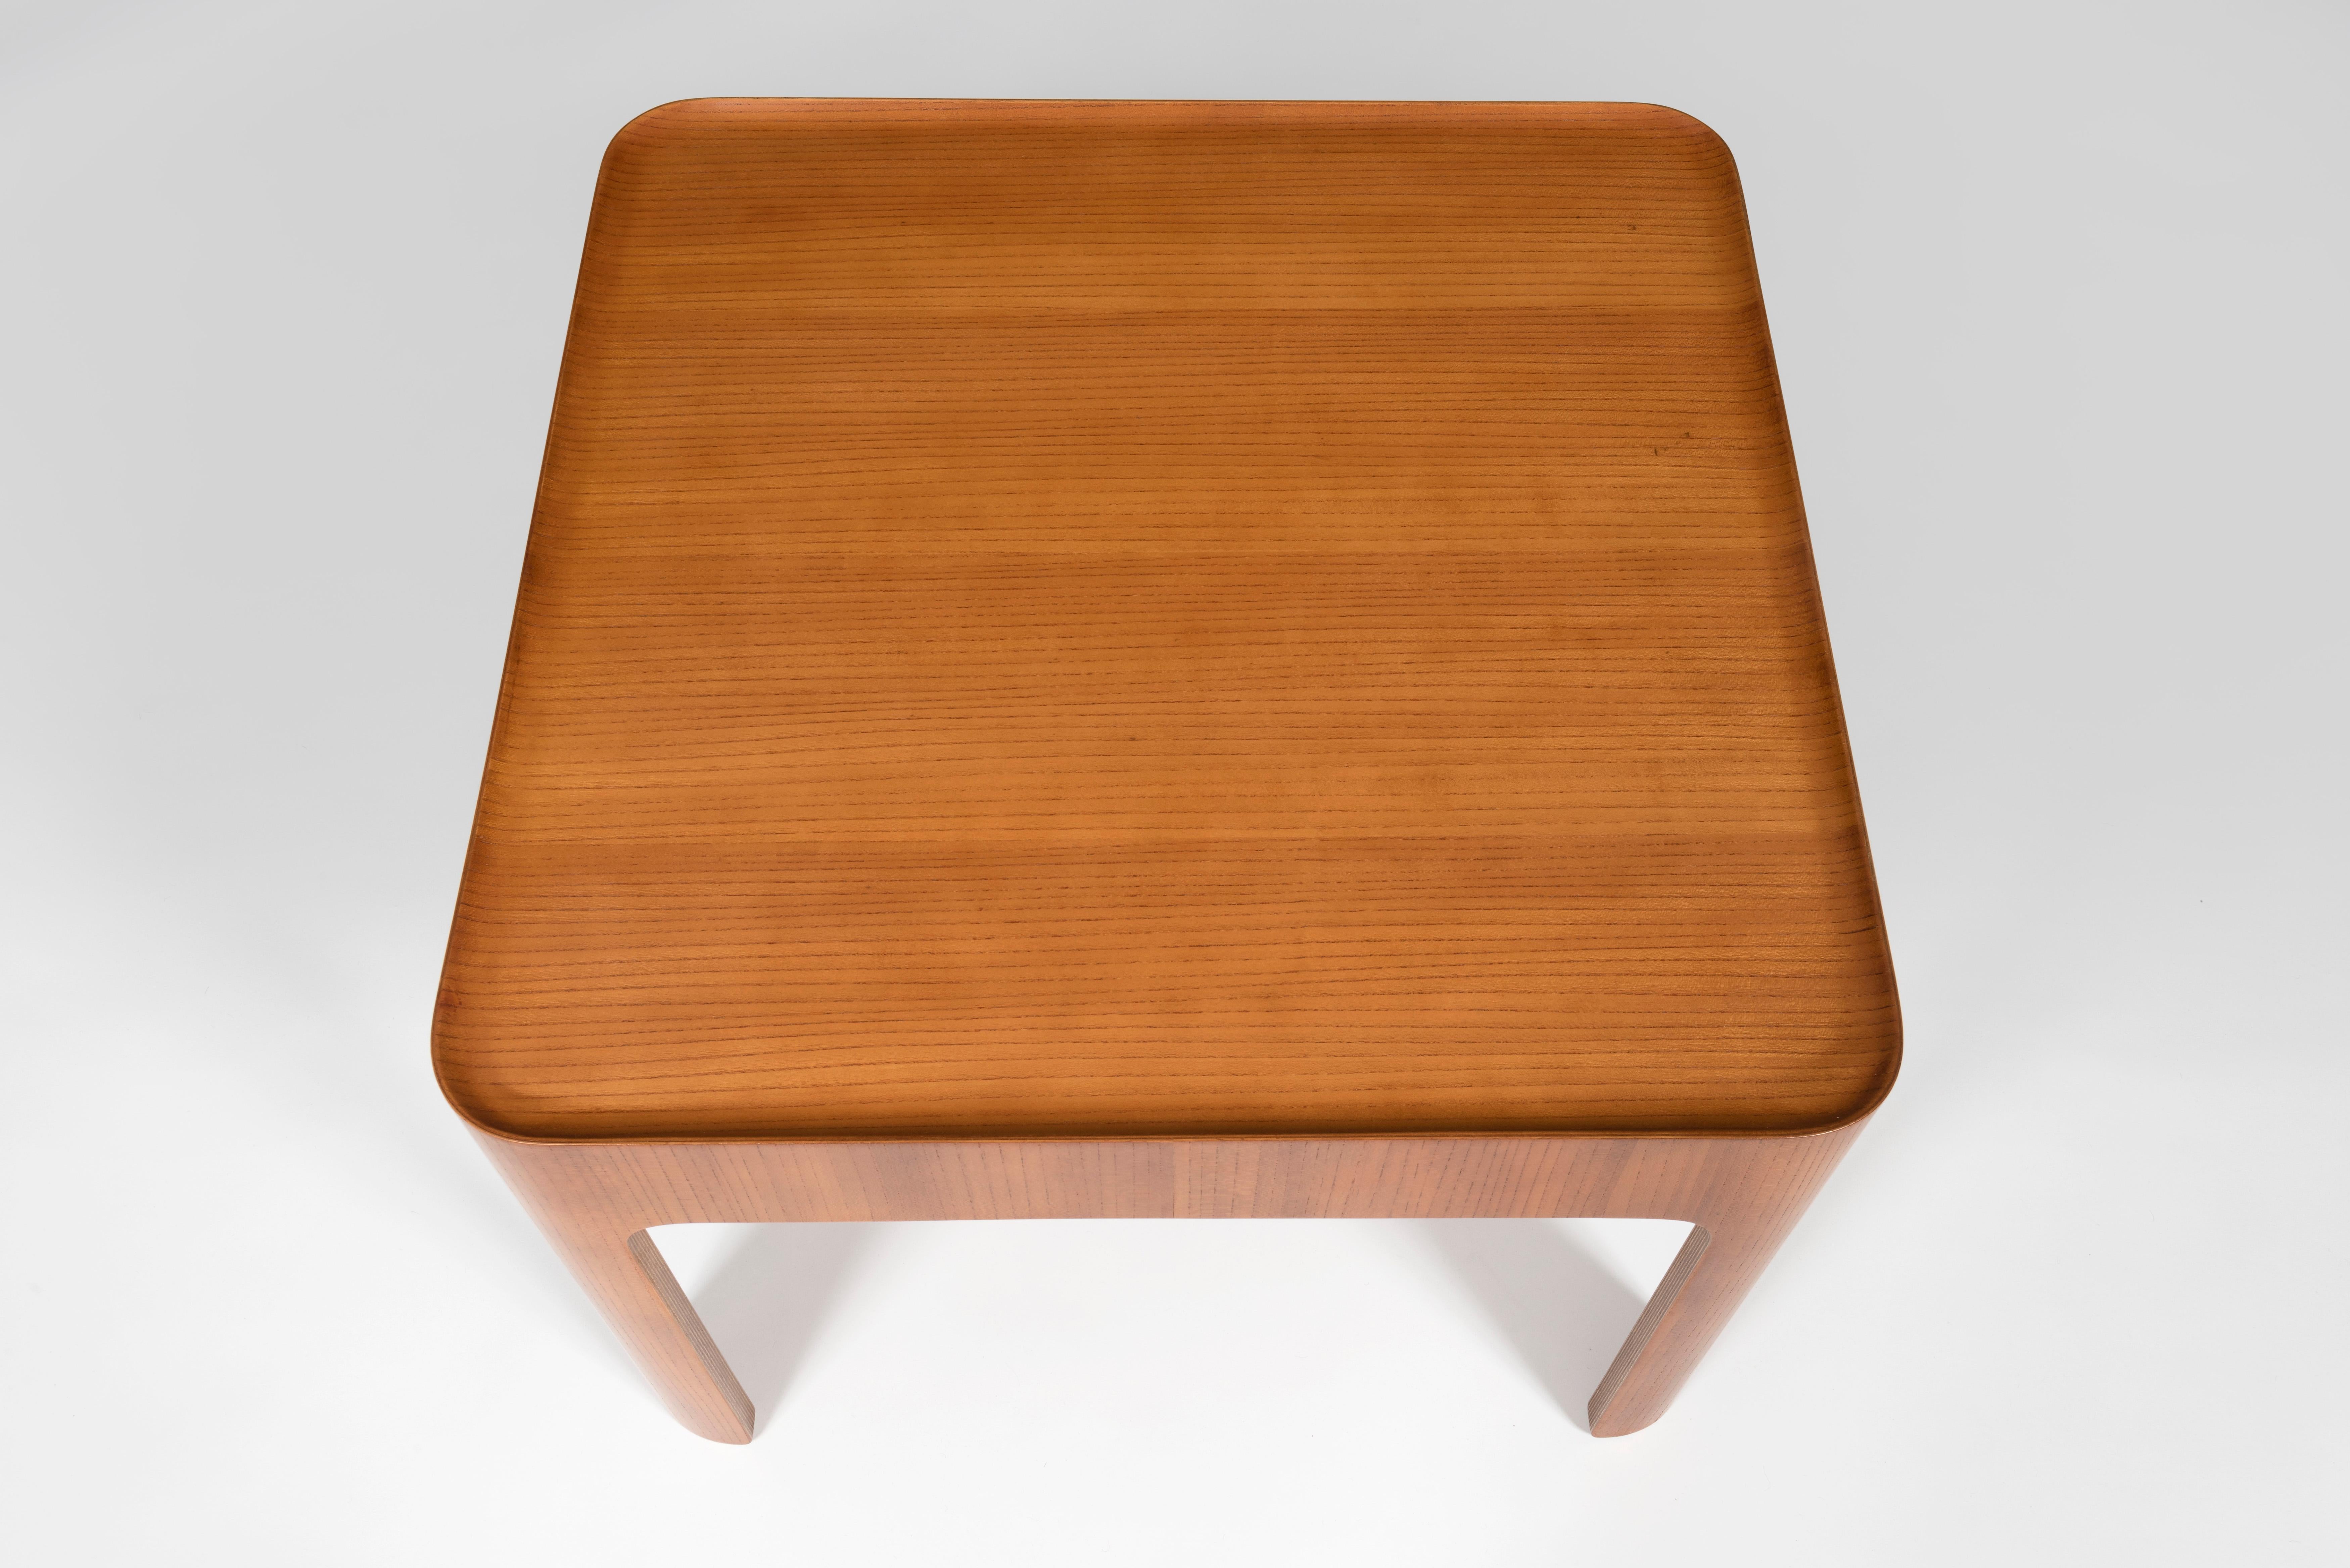 Minimalist Japanese Modern Set of Coffee Tables by Isamu Kenmochi, 1960's For Sale